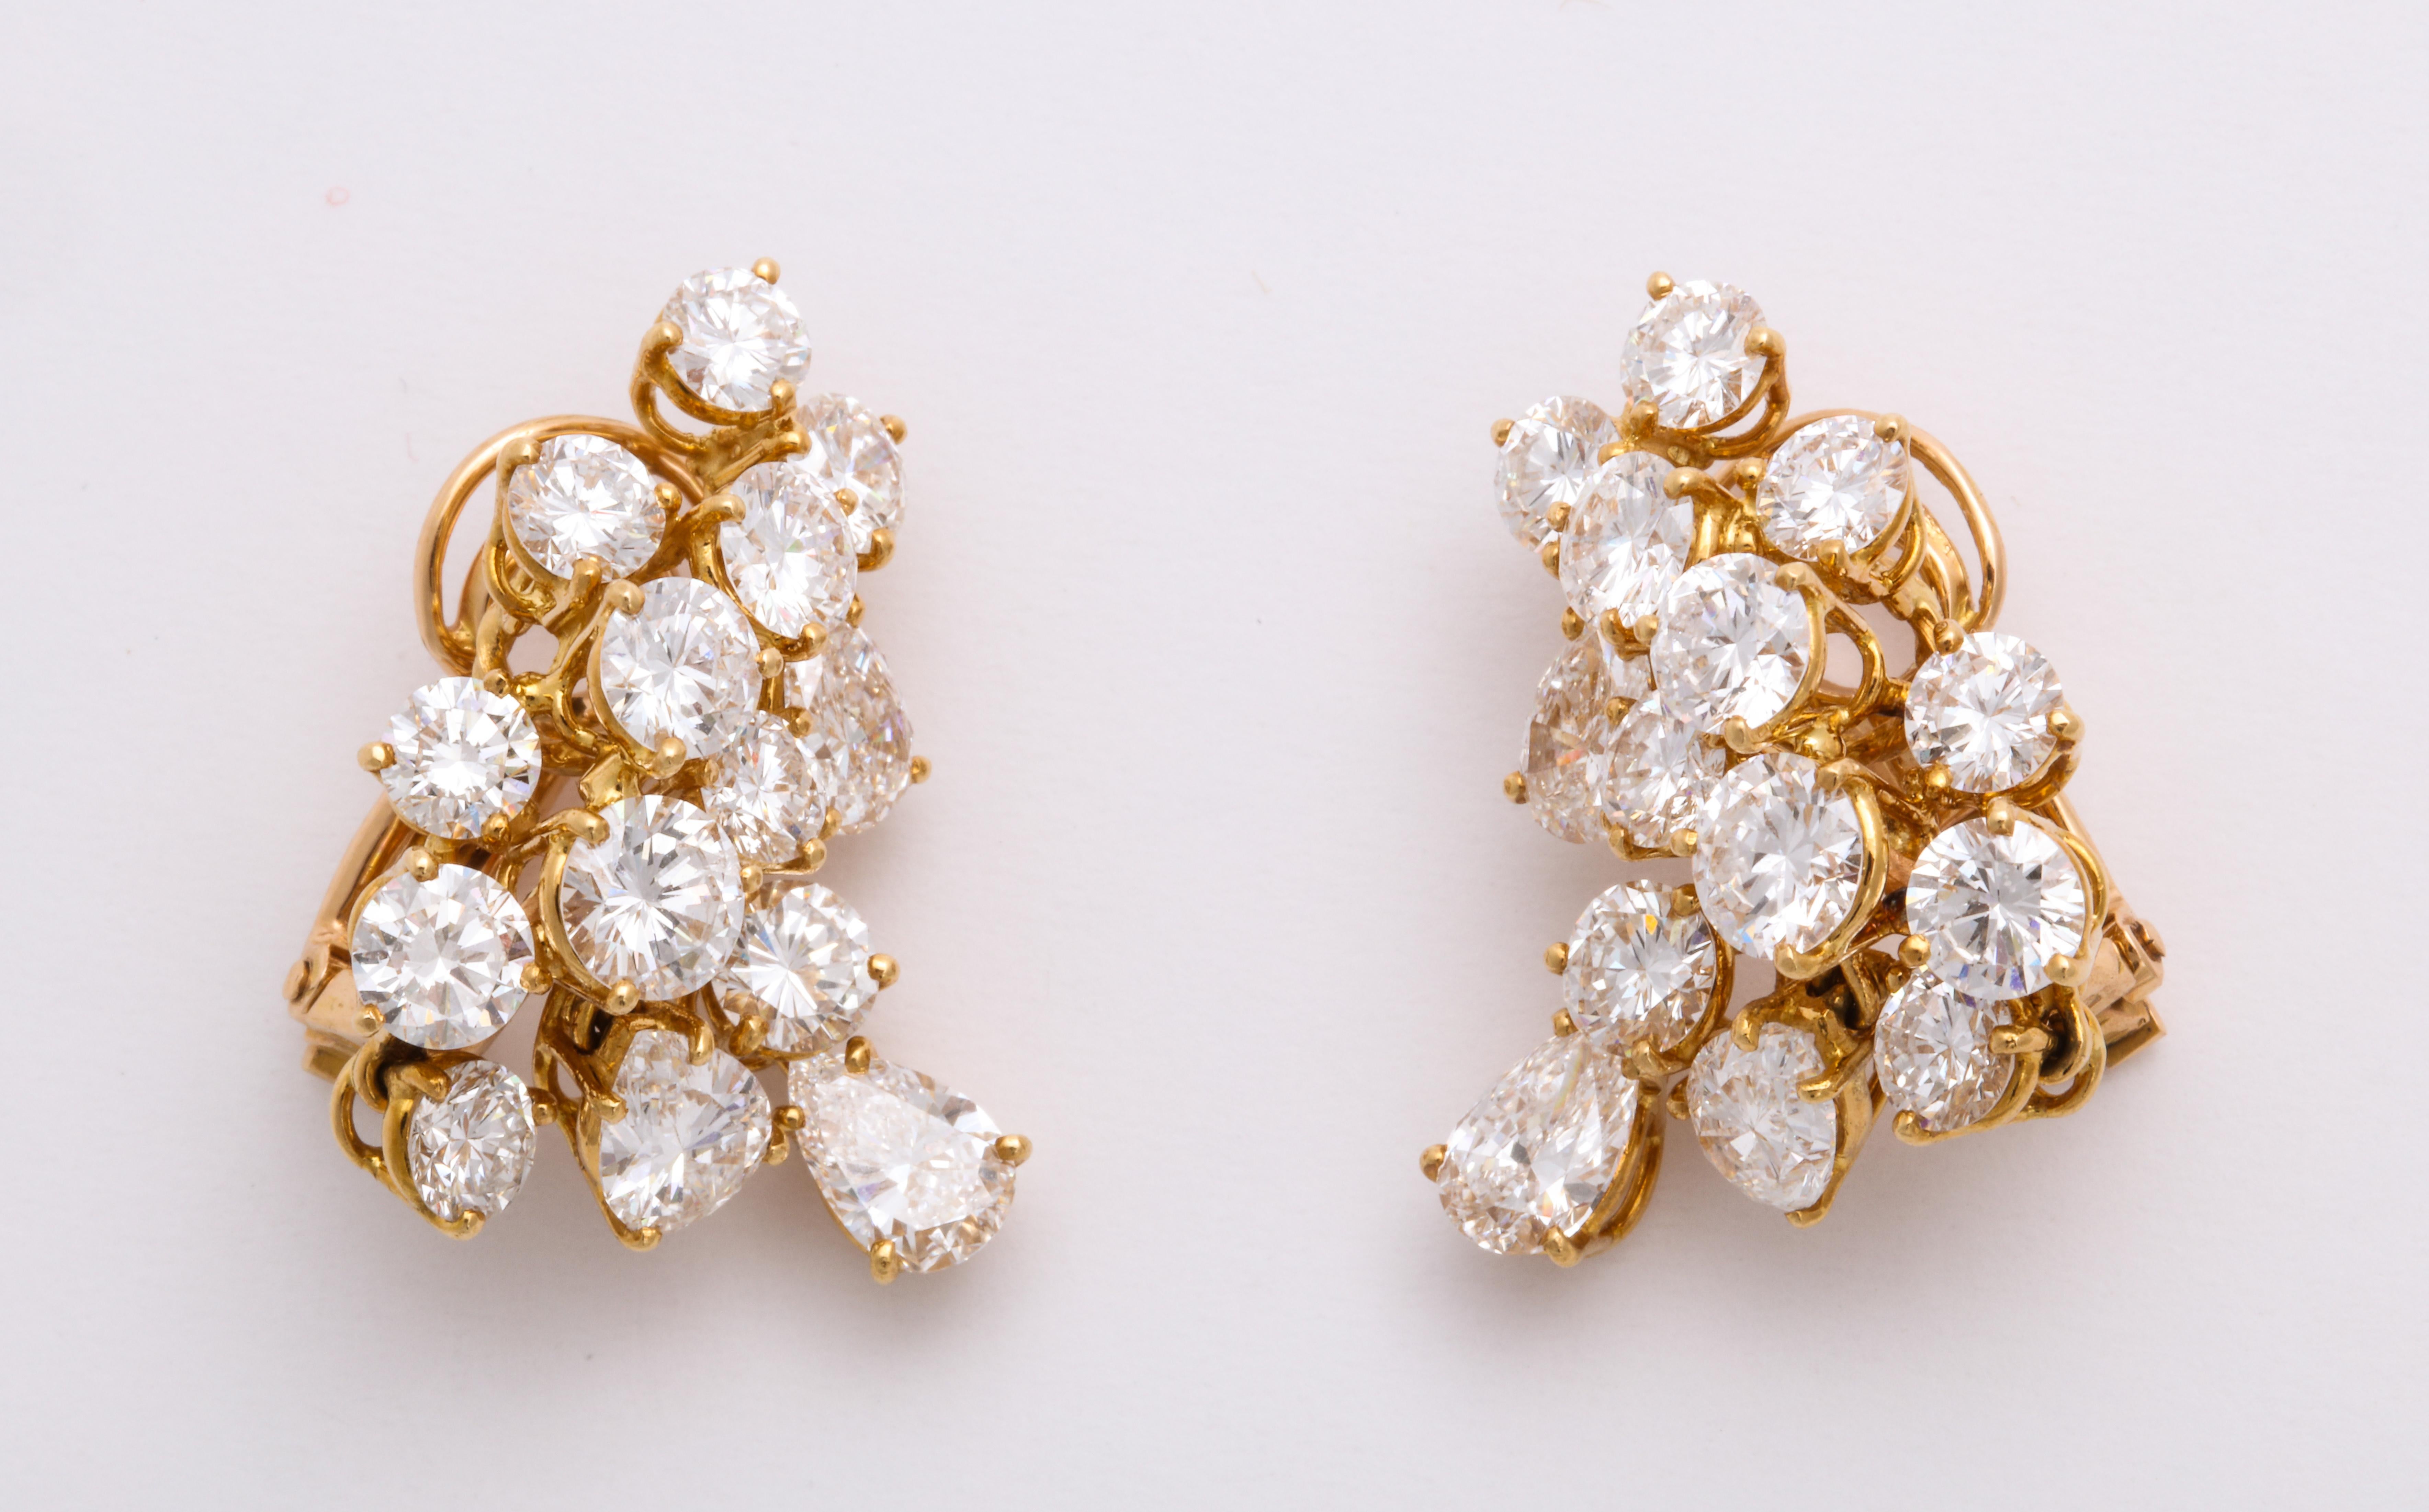 Timeless...Pair of 18KYG & Diamond ear clips signed Boucheron features 8.50cts est. total diamond weight.
c1960s